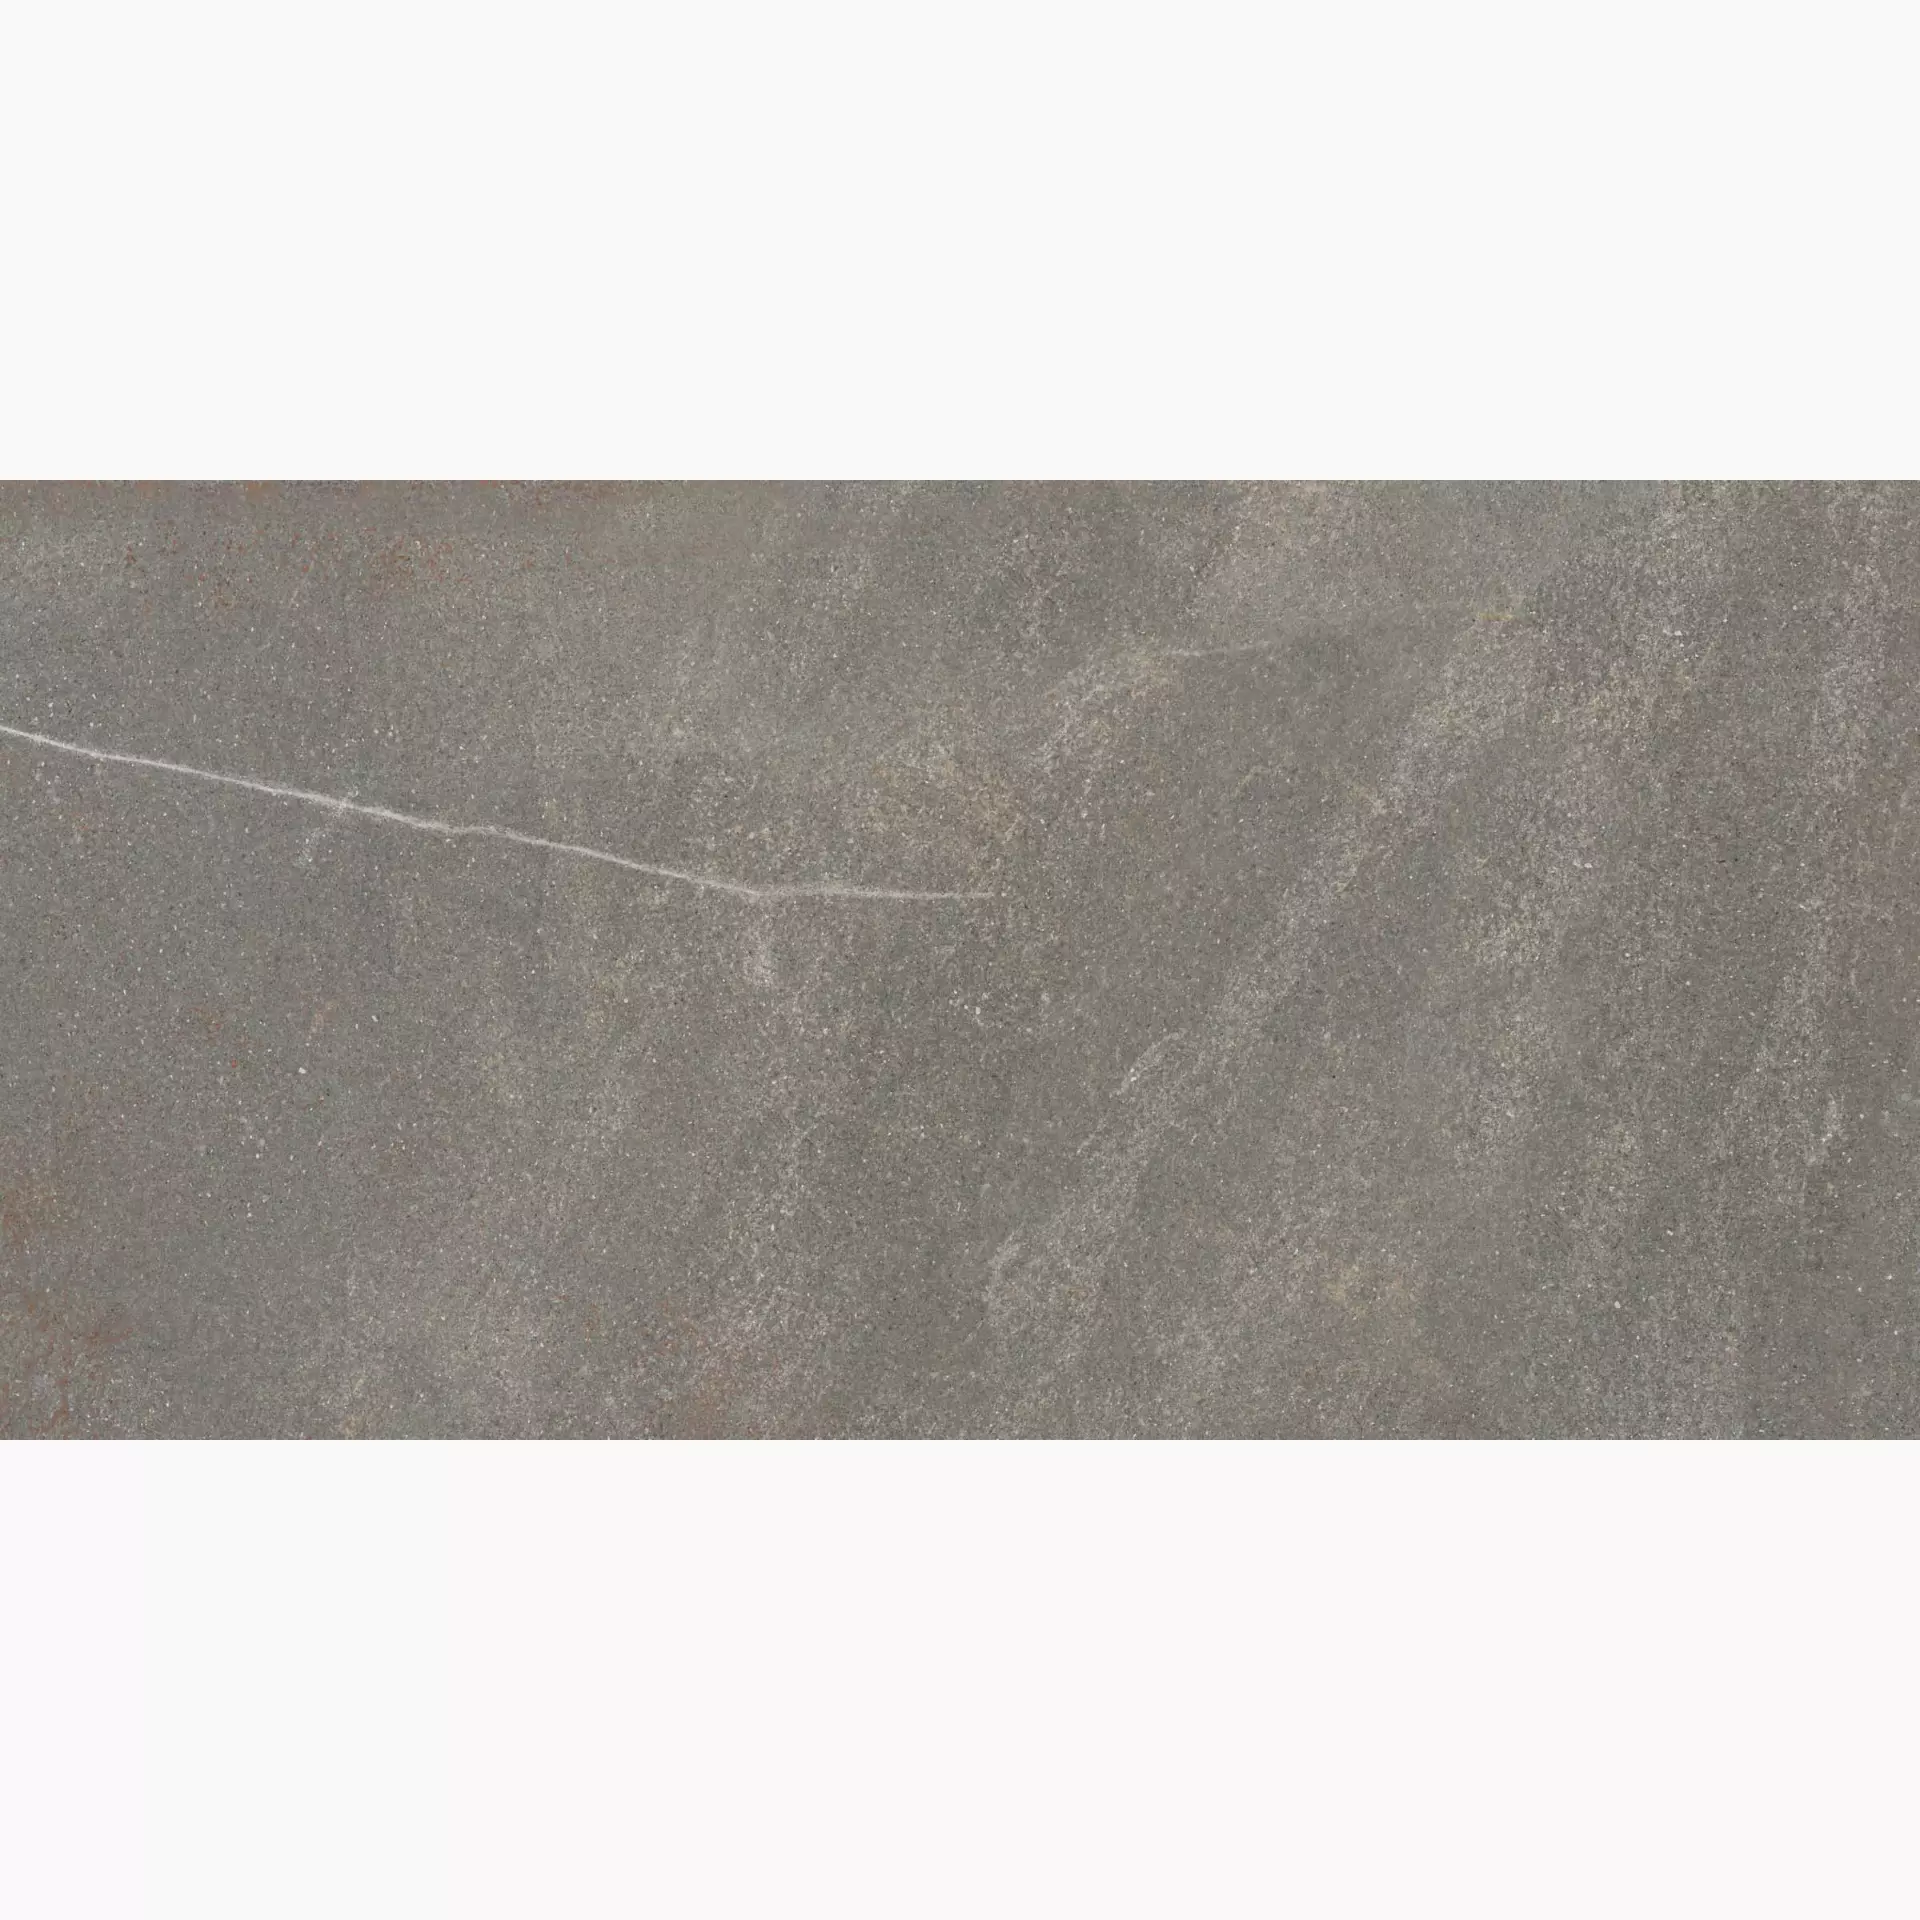 ABK Poetry Stone Piase Mud Naturale PF60010182 60x120cm rectified 8,5mm